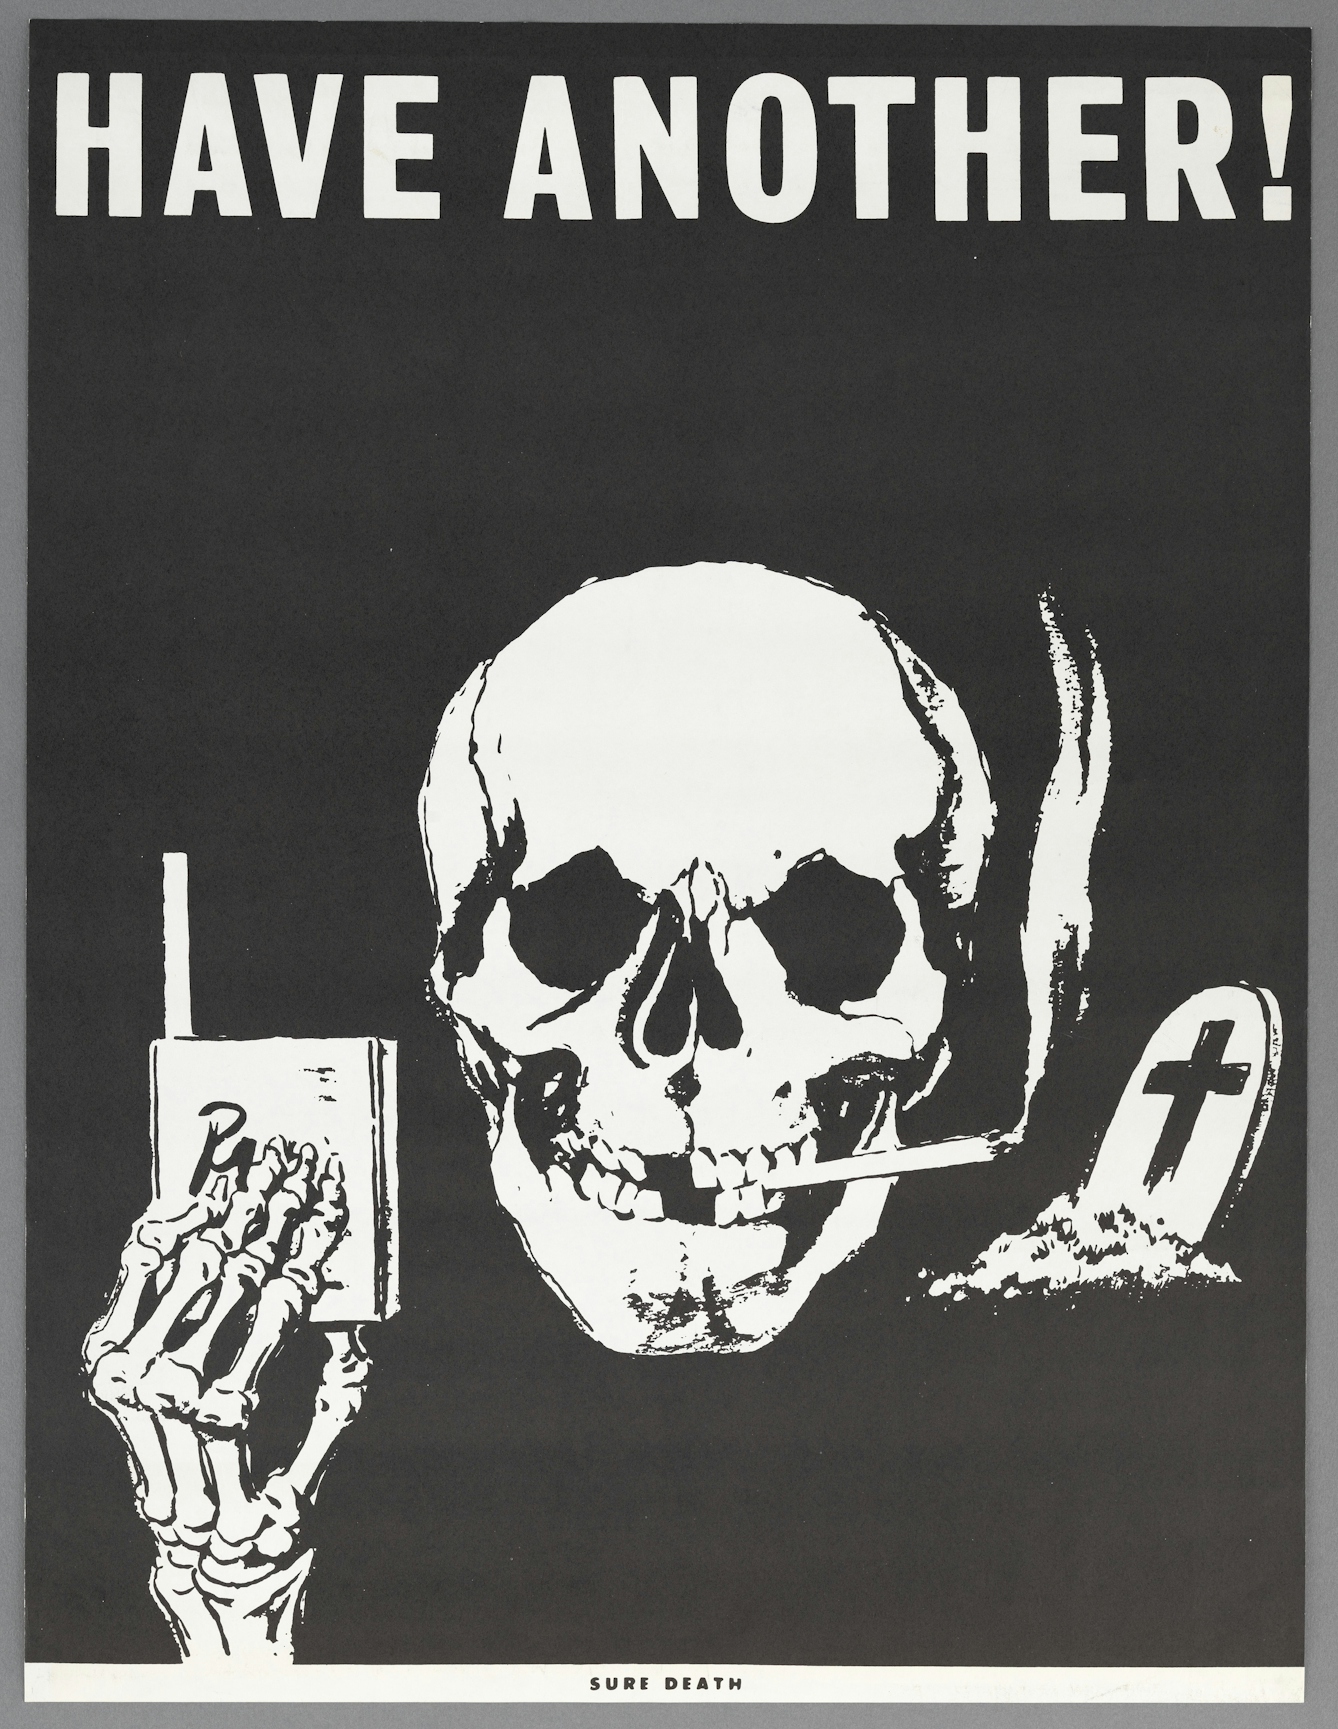 A black and white poster with the text, "Have Another! Sure Death", and an illustration of a skull with a smoking cigarette in its mouth, a skeleton hand offering a cigarette, and a grave stone in the background.